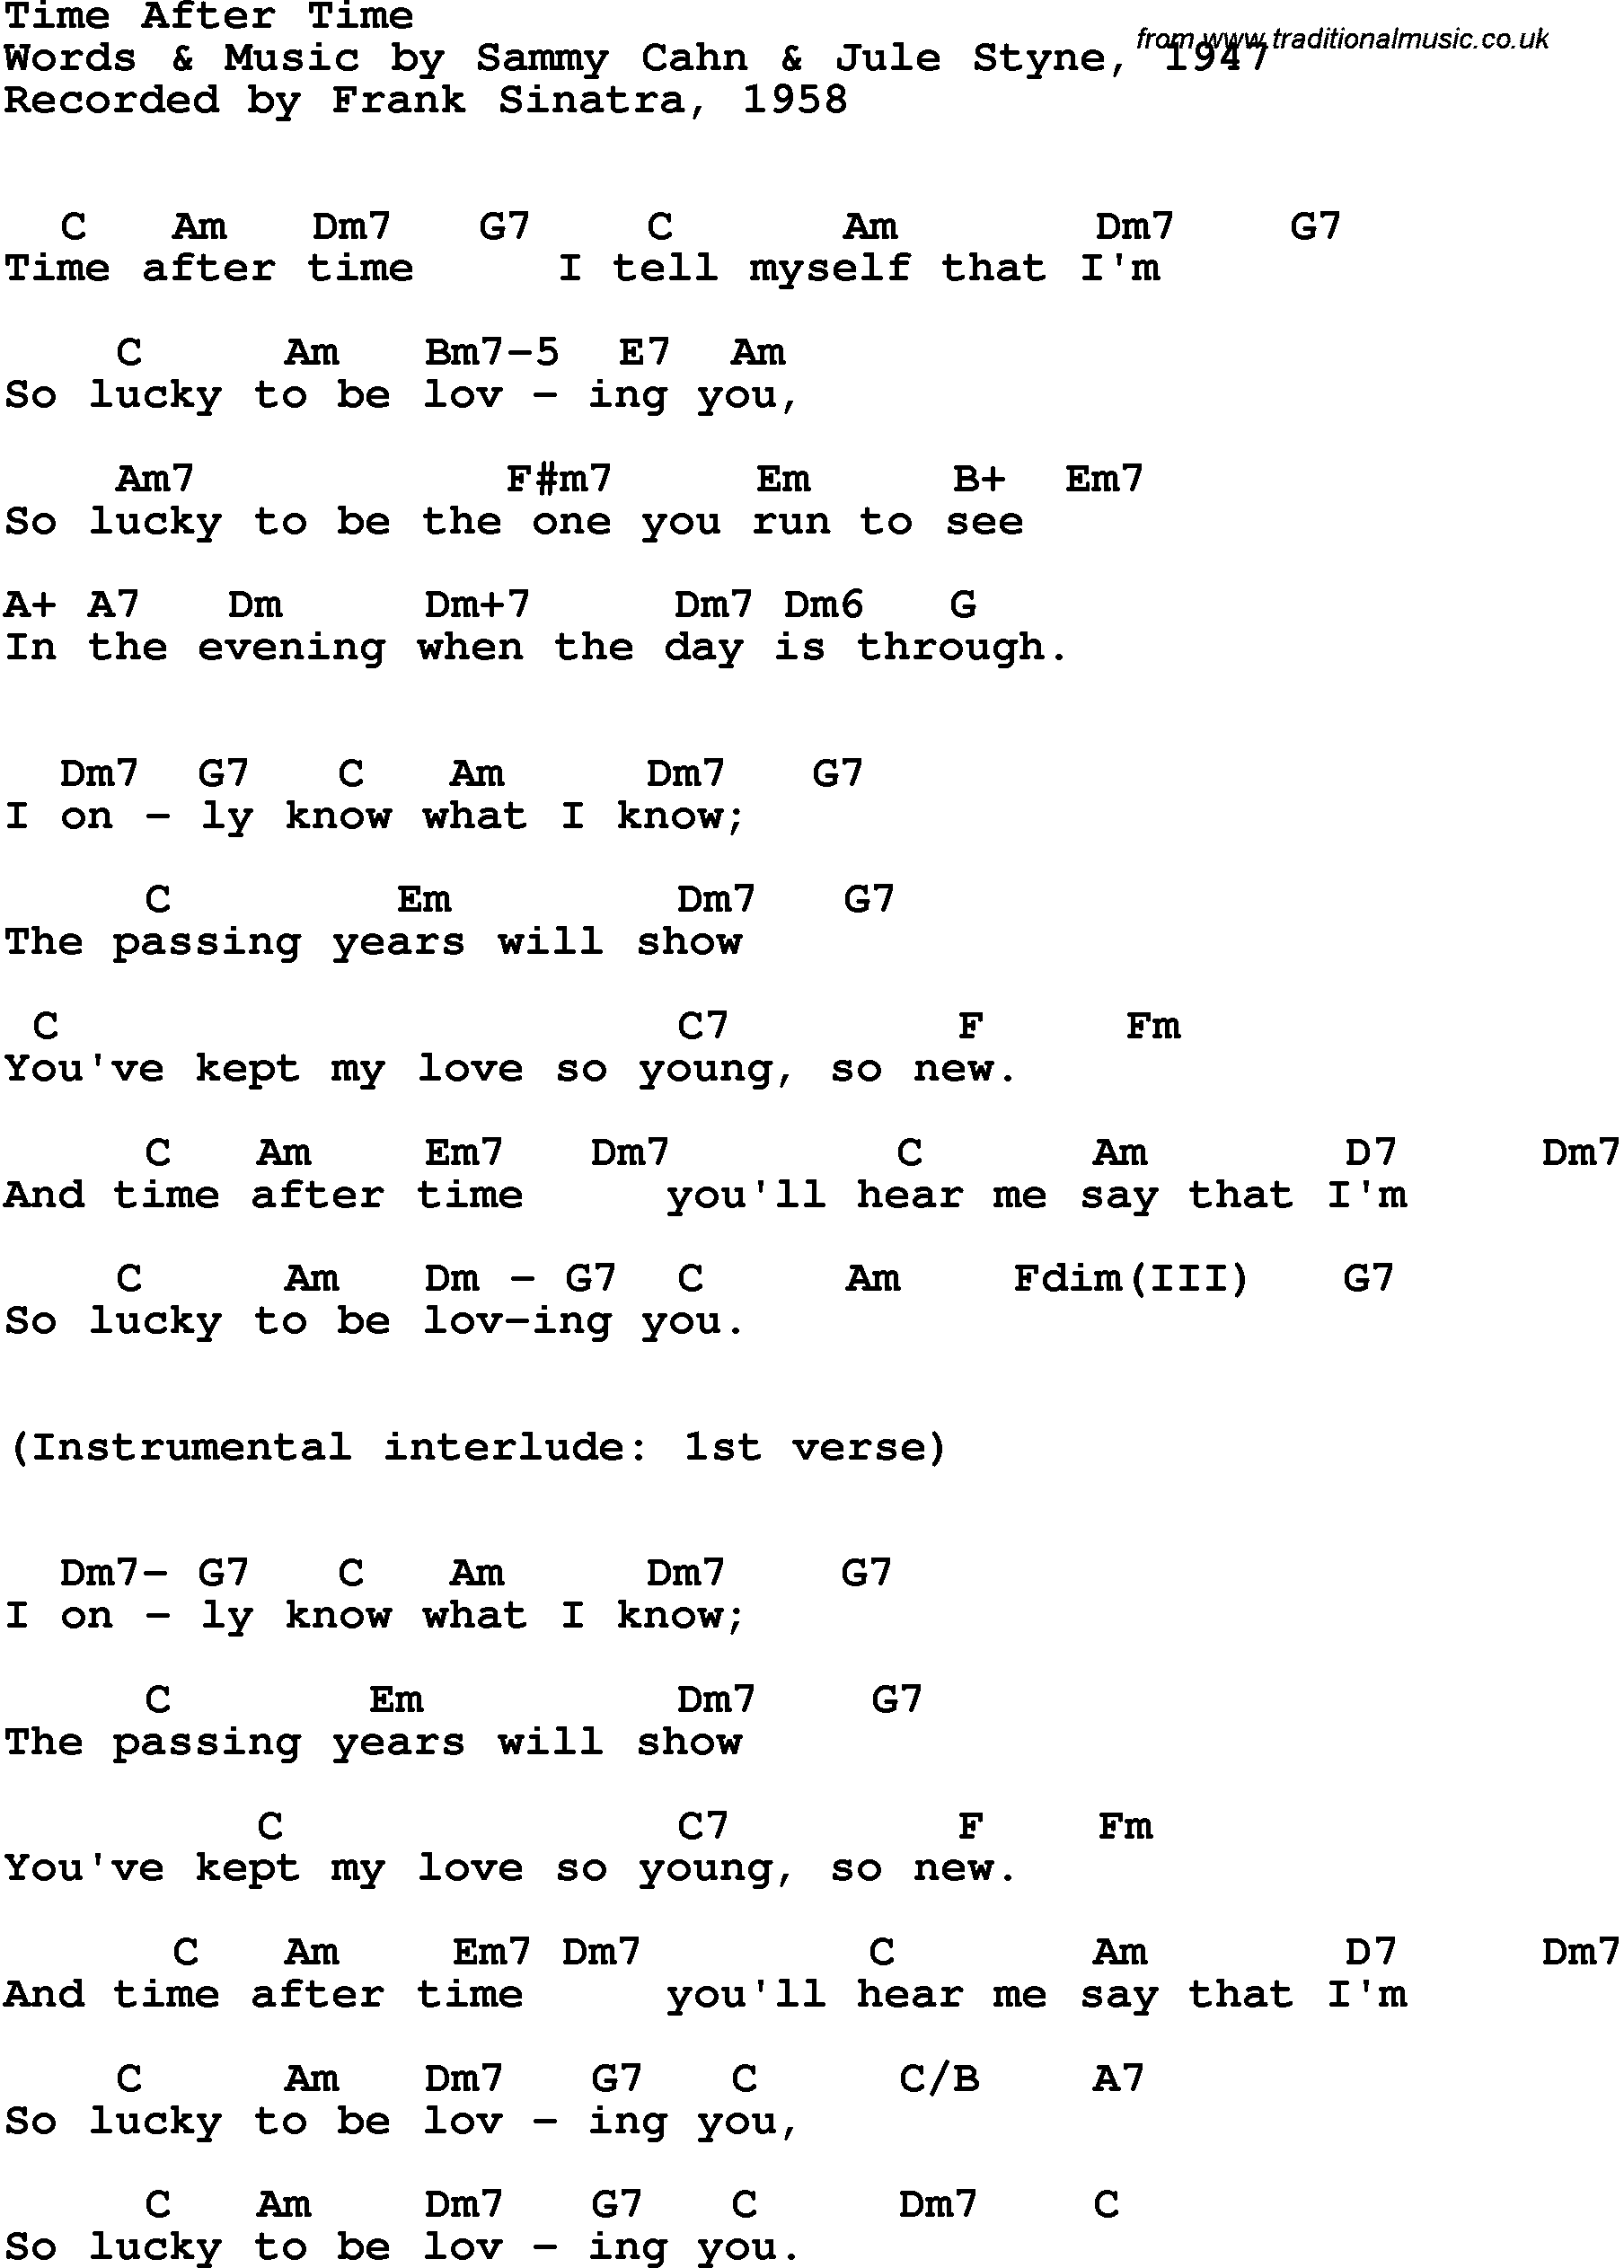 Song Lyrics with guitar chords for Time After Time - Dinah Washington, 1957